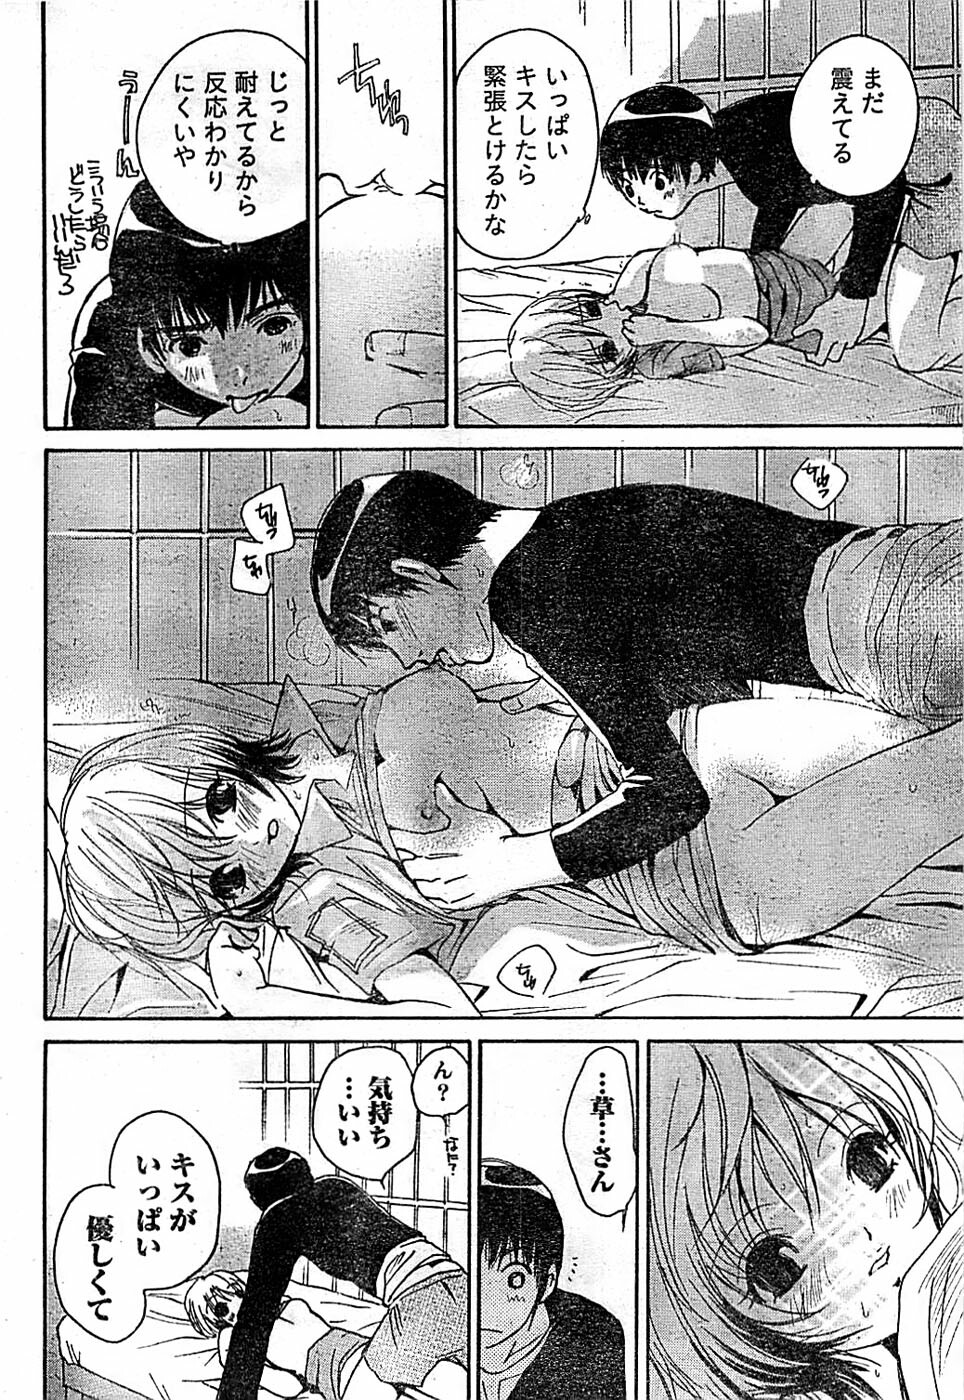 Doki! Special 2008-01 page 52 full